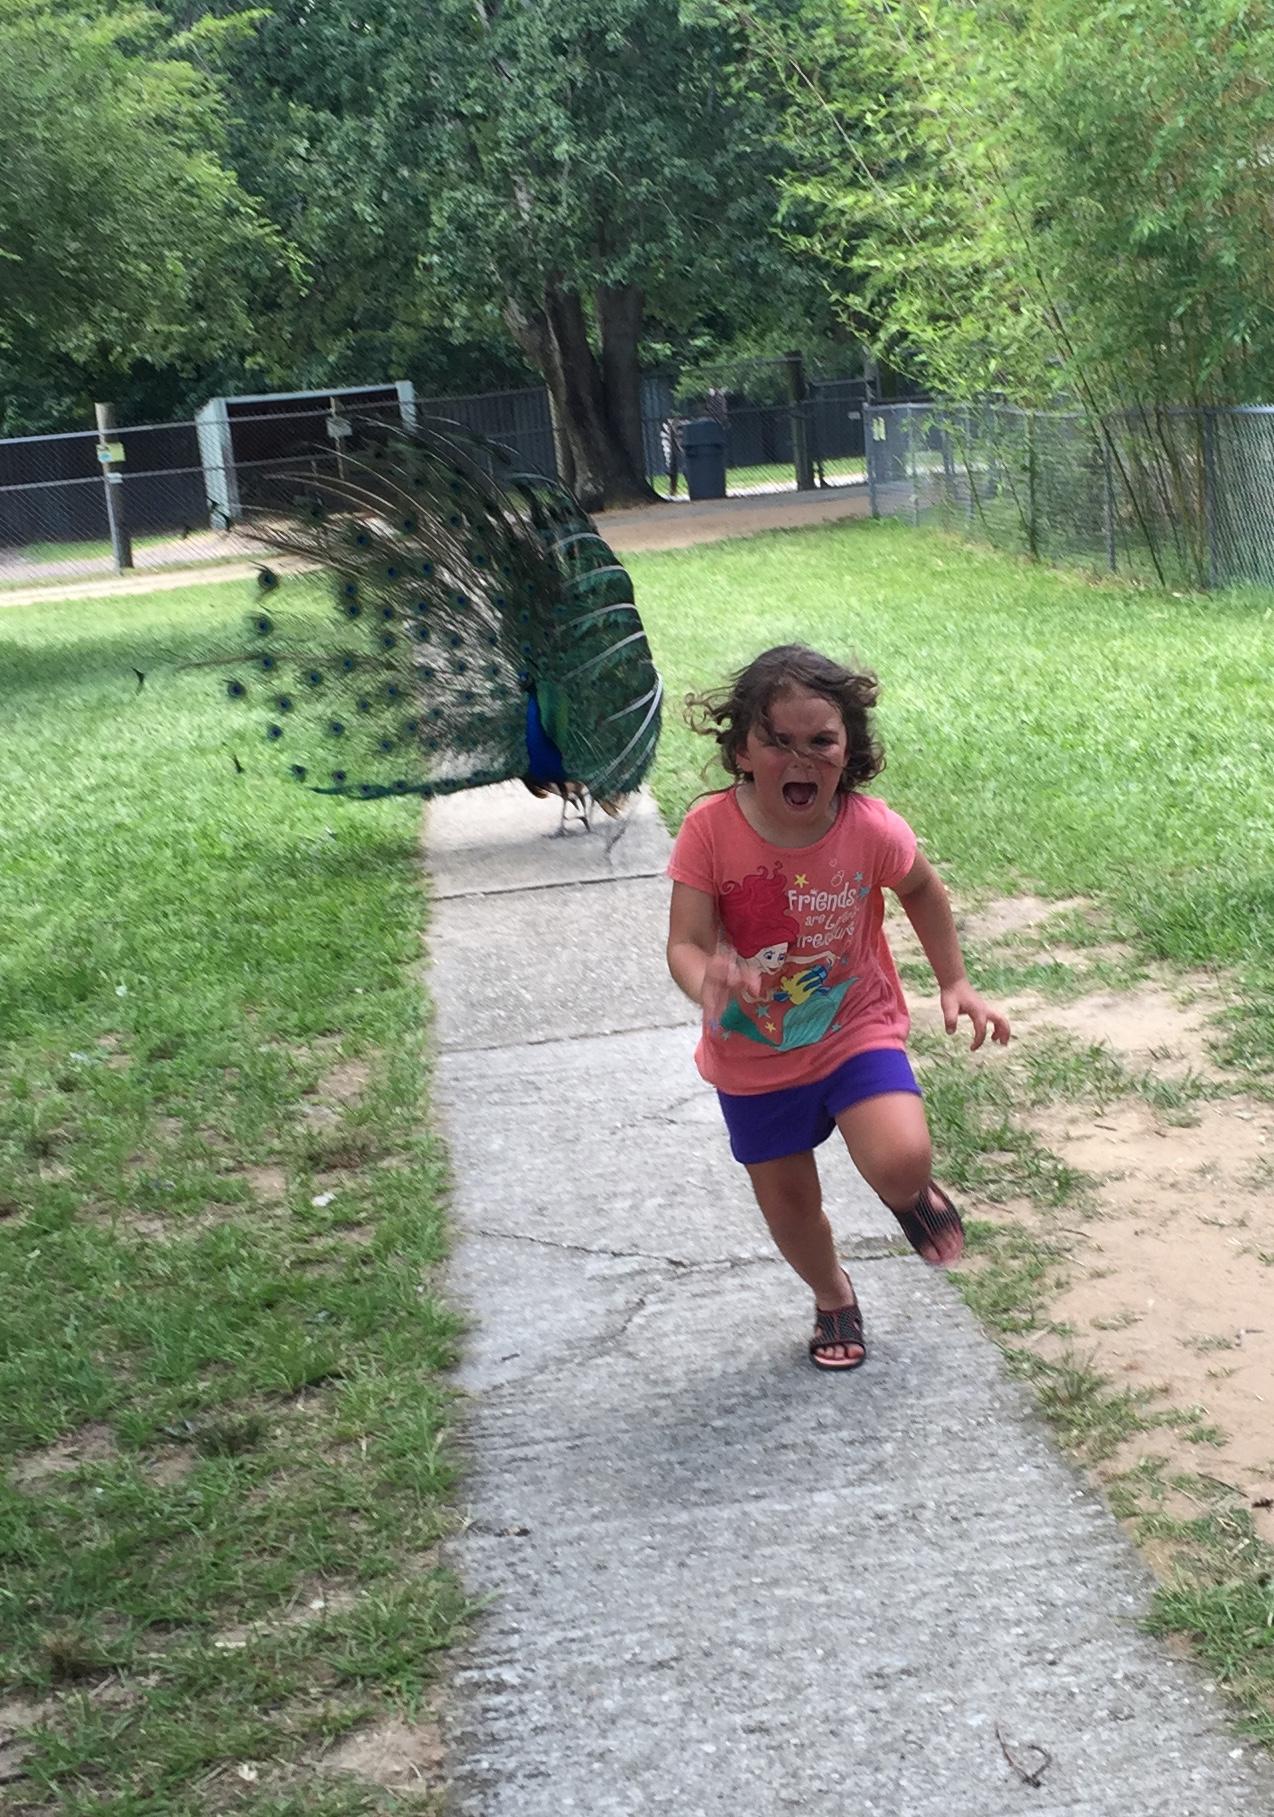 PHOTO: The Story Behind the Little Girl Running Terrified from Peacock 